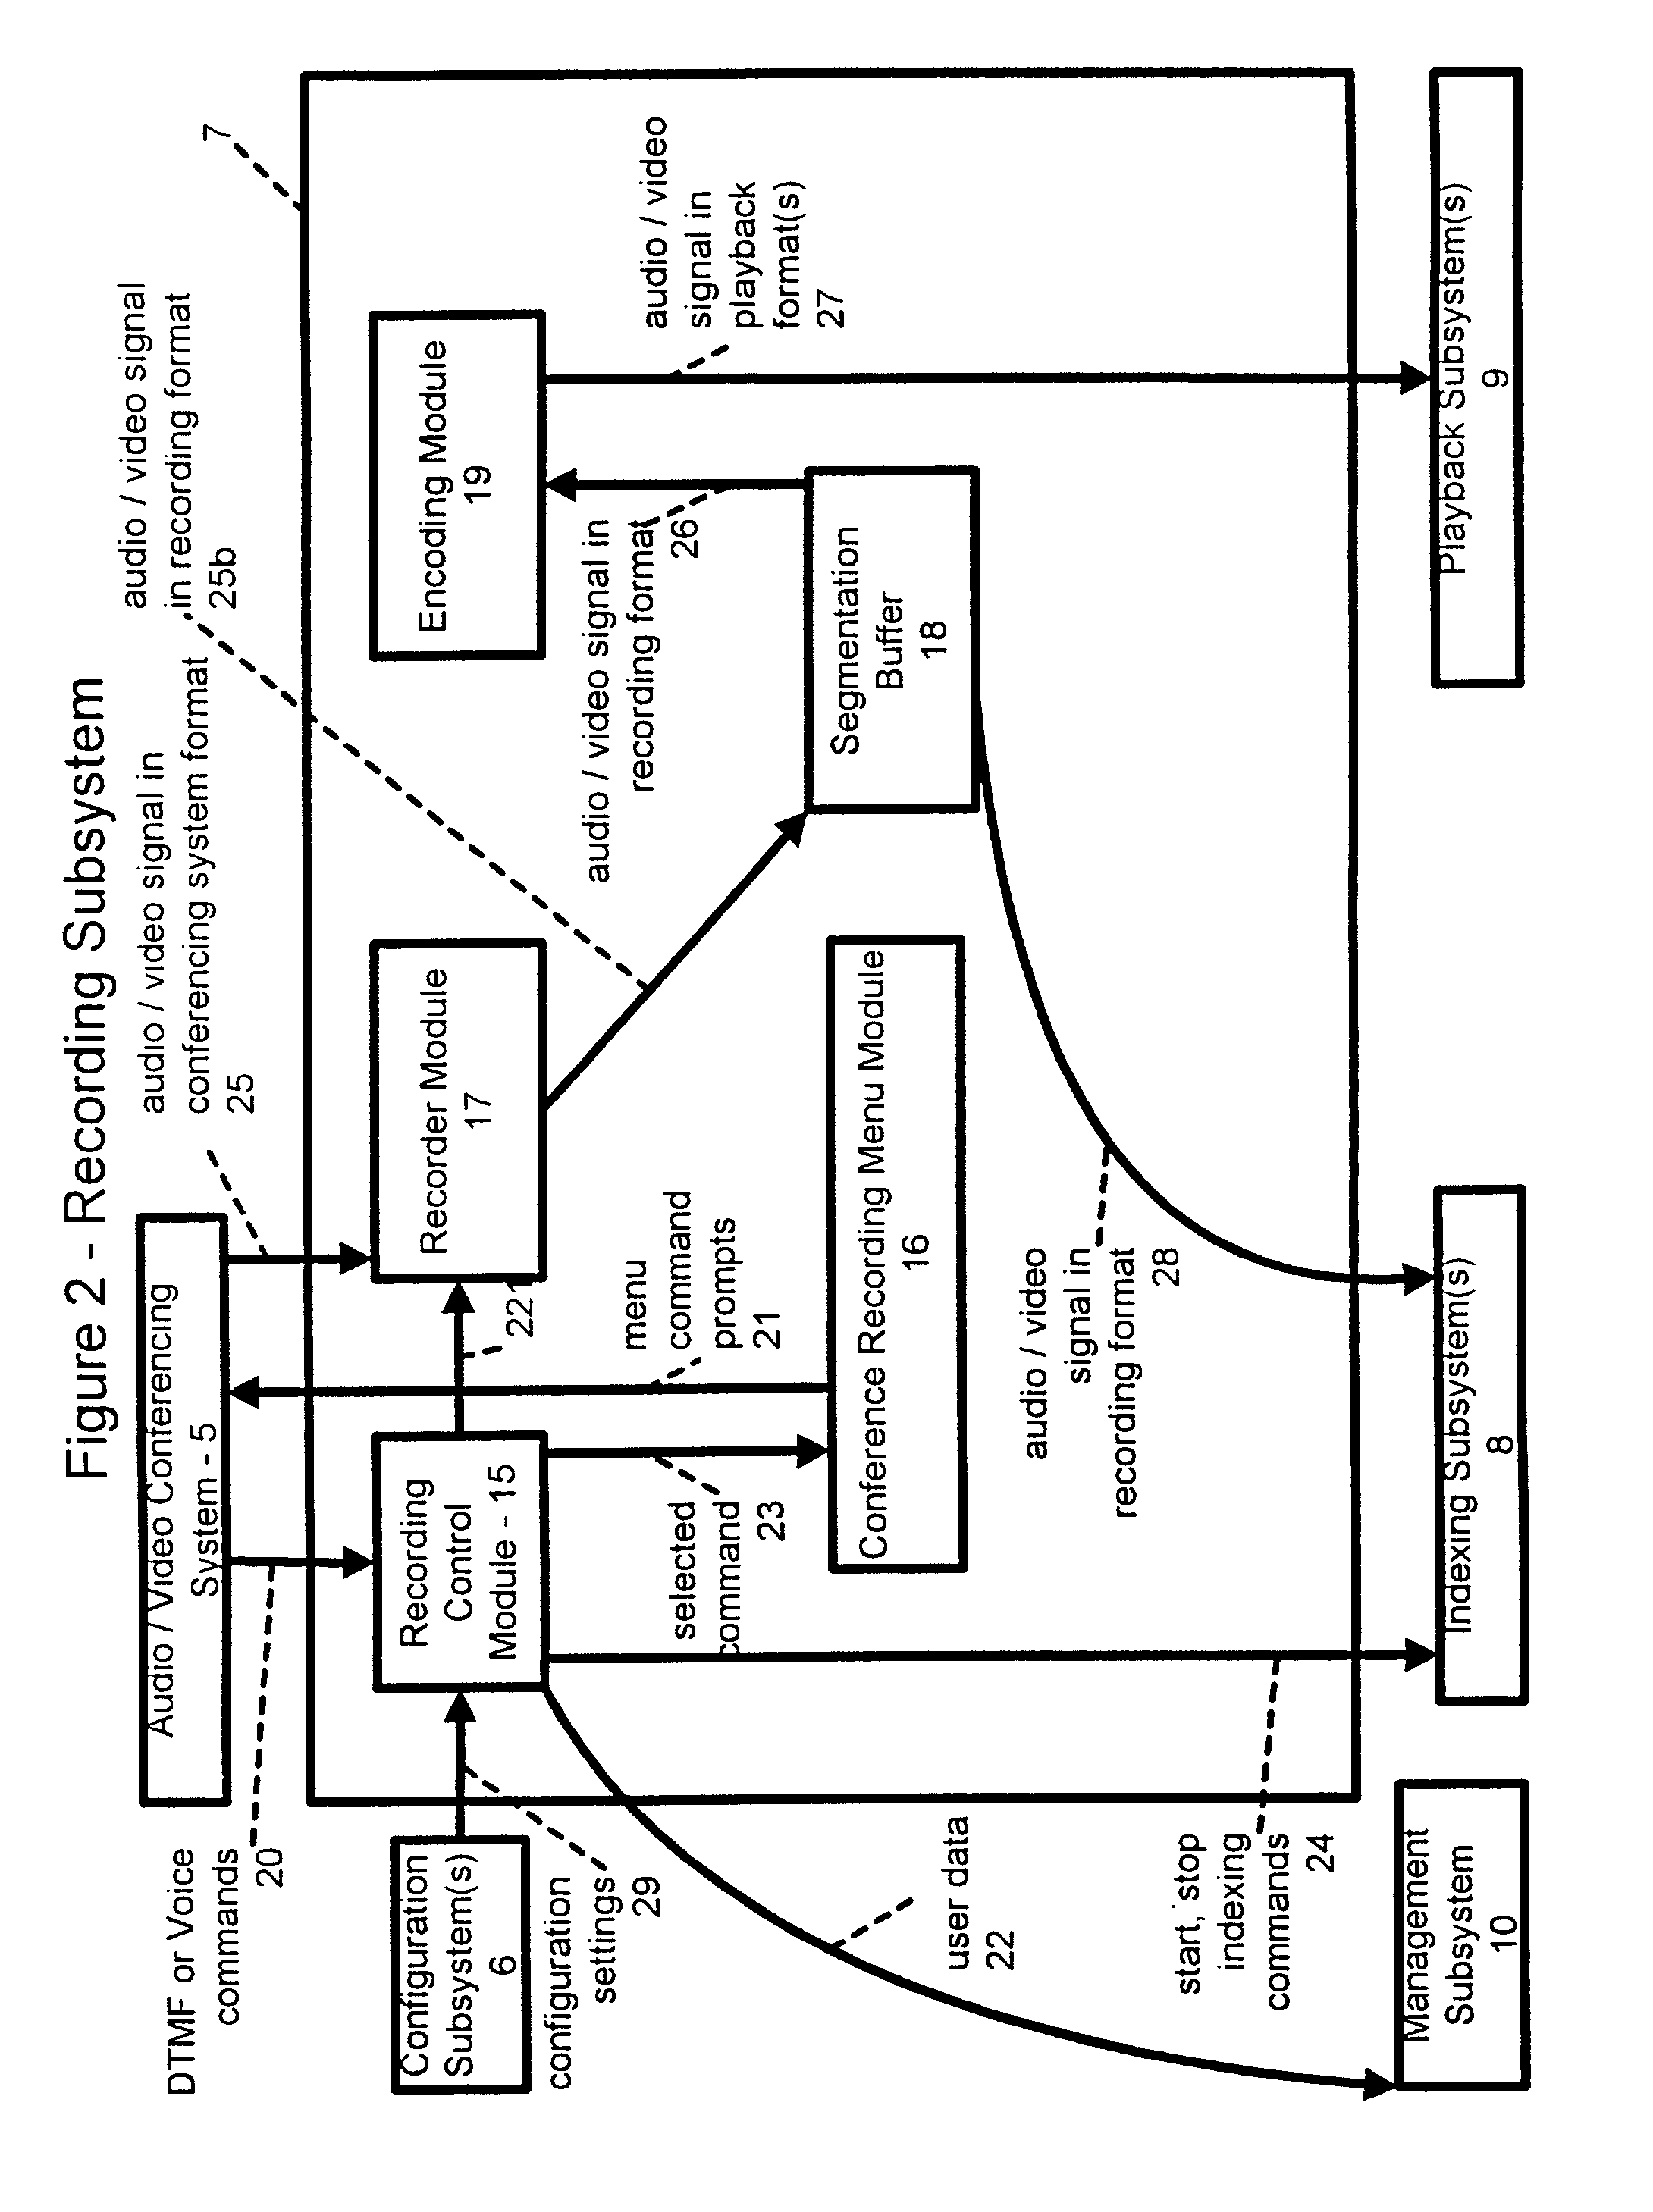 Method and system for recording and indexing audio and video conference calls allowing topic-based notification and navigation of recordings